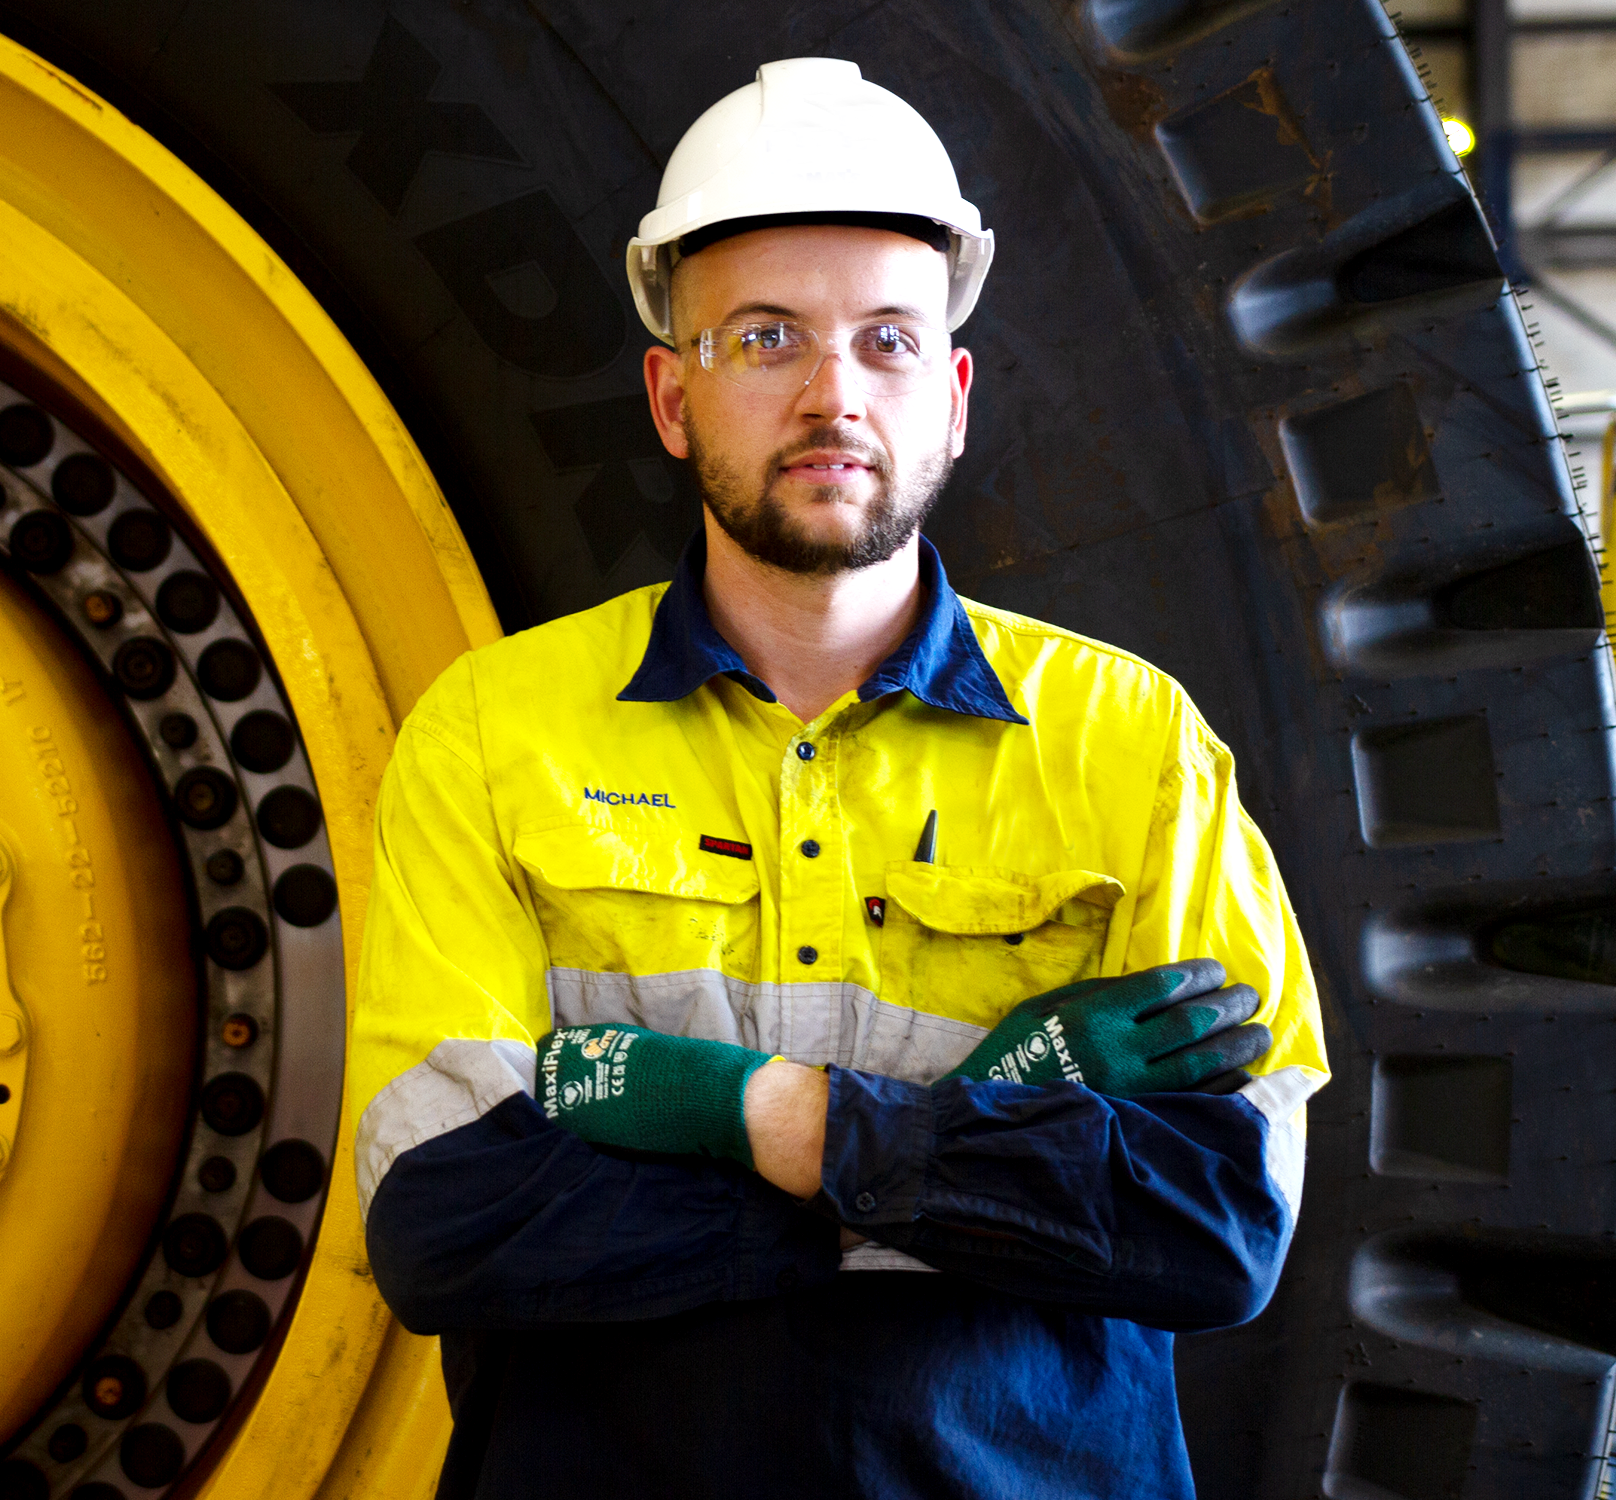 <em>Michael</em> - Hired, upskilled and successfully working as a Heavy Mobile Plant Technician at Komatsu Mining Corp 2